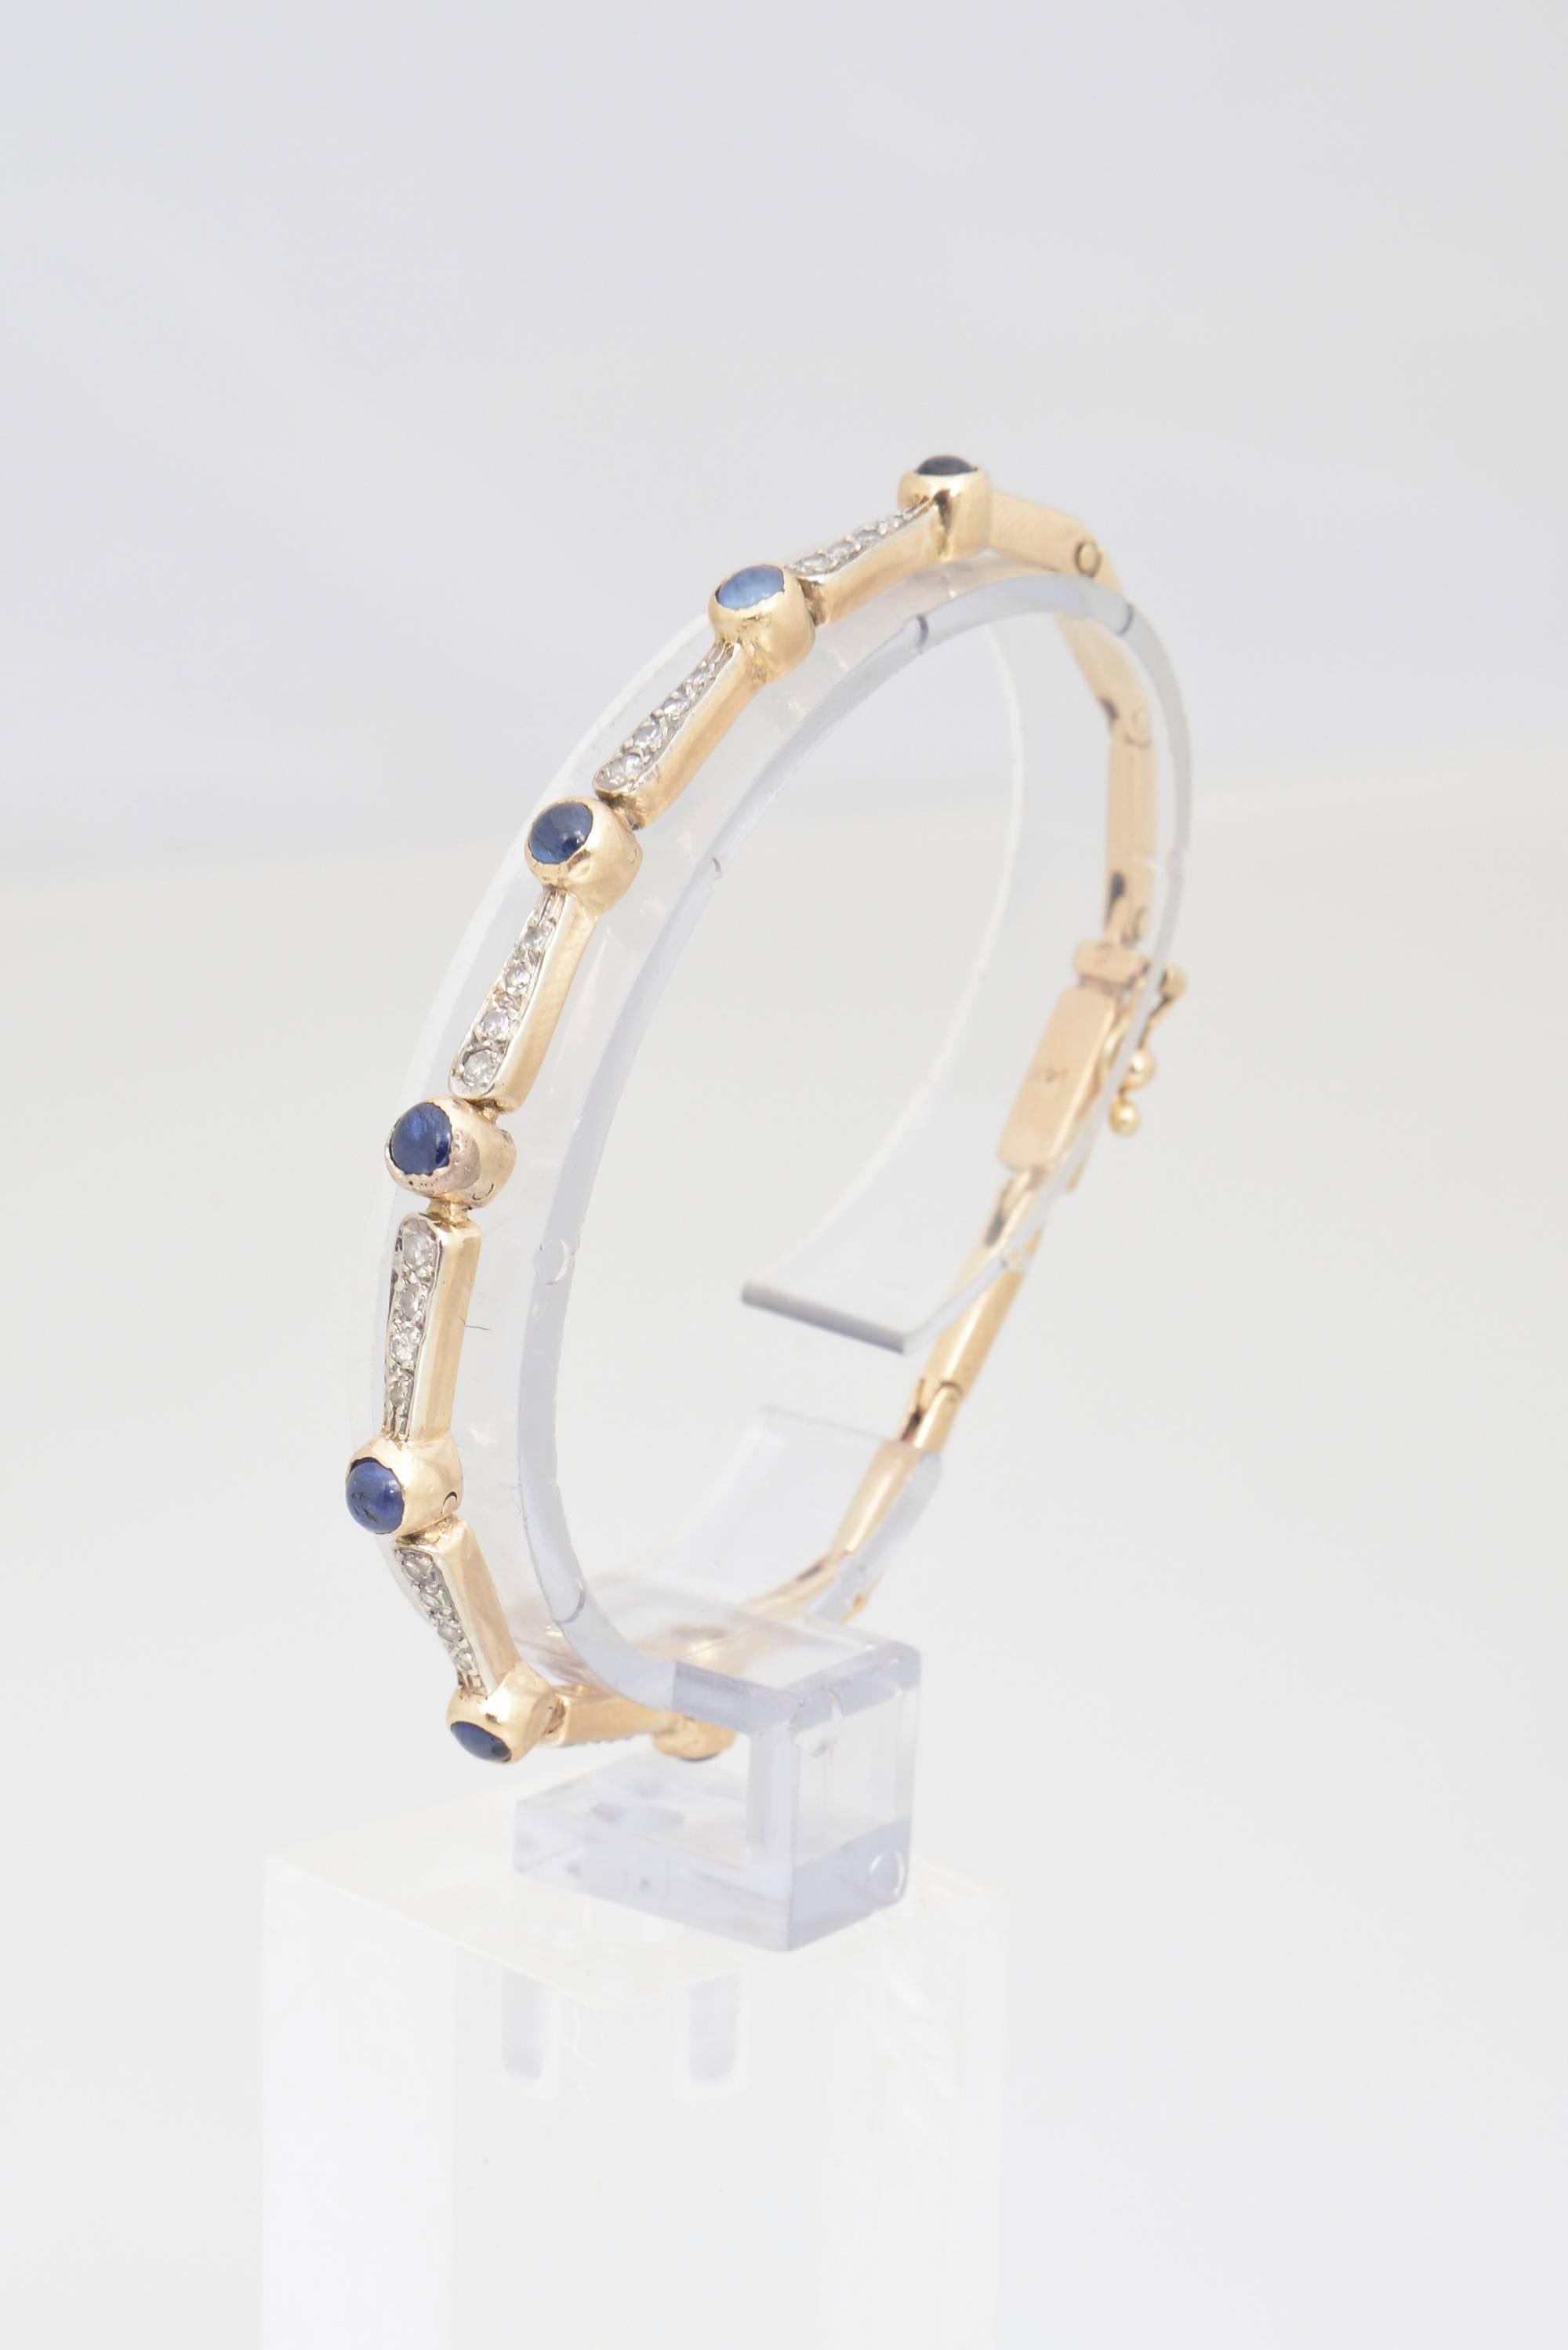 Antique delicate 14K yellow gold bracelet featuring seven bezel-set cabochon sapphires between six diamond bars. Marked on clasp.